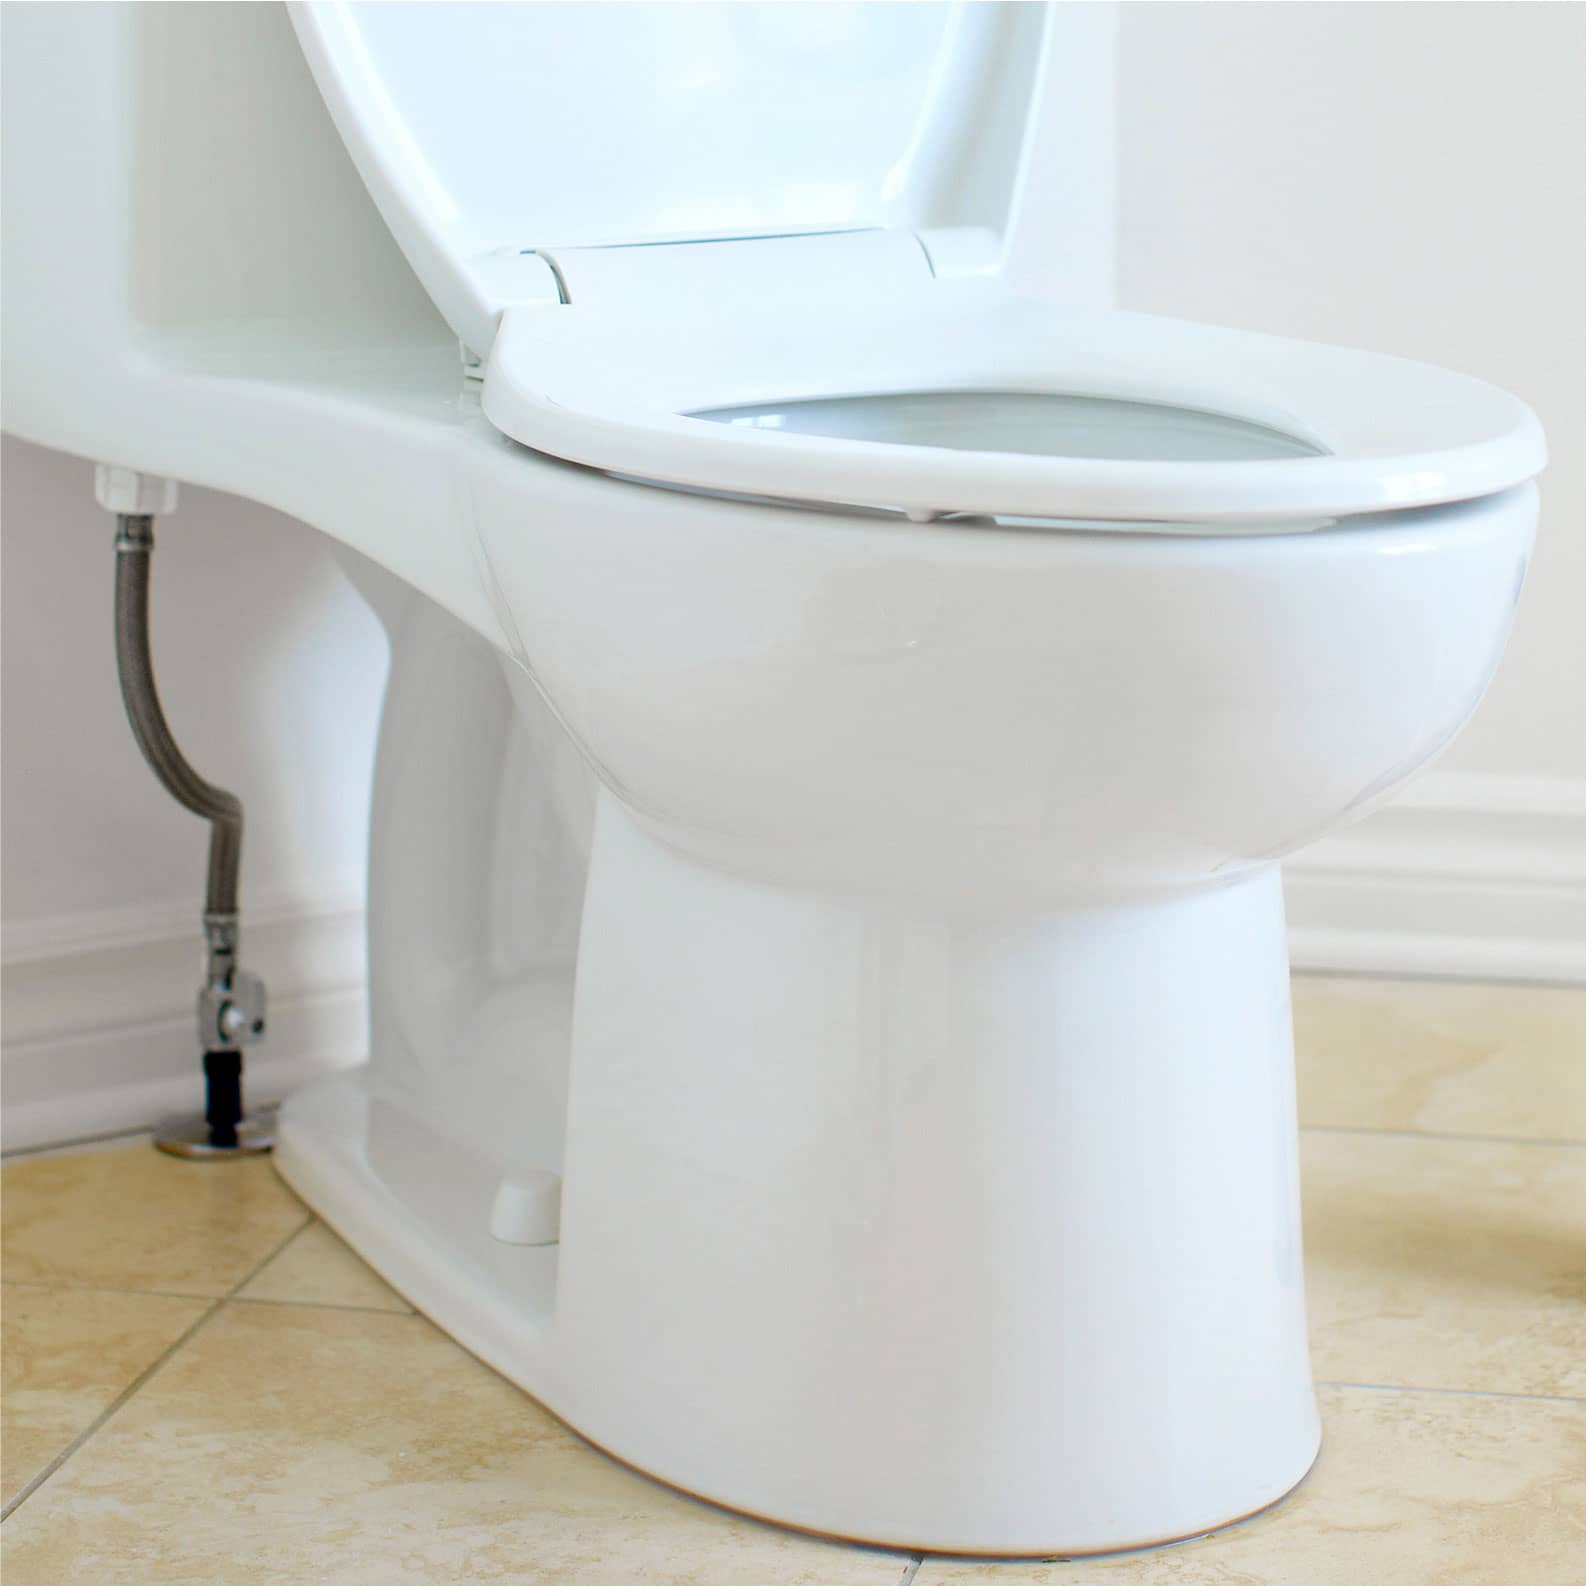 image of a low flow toilet